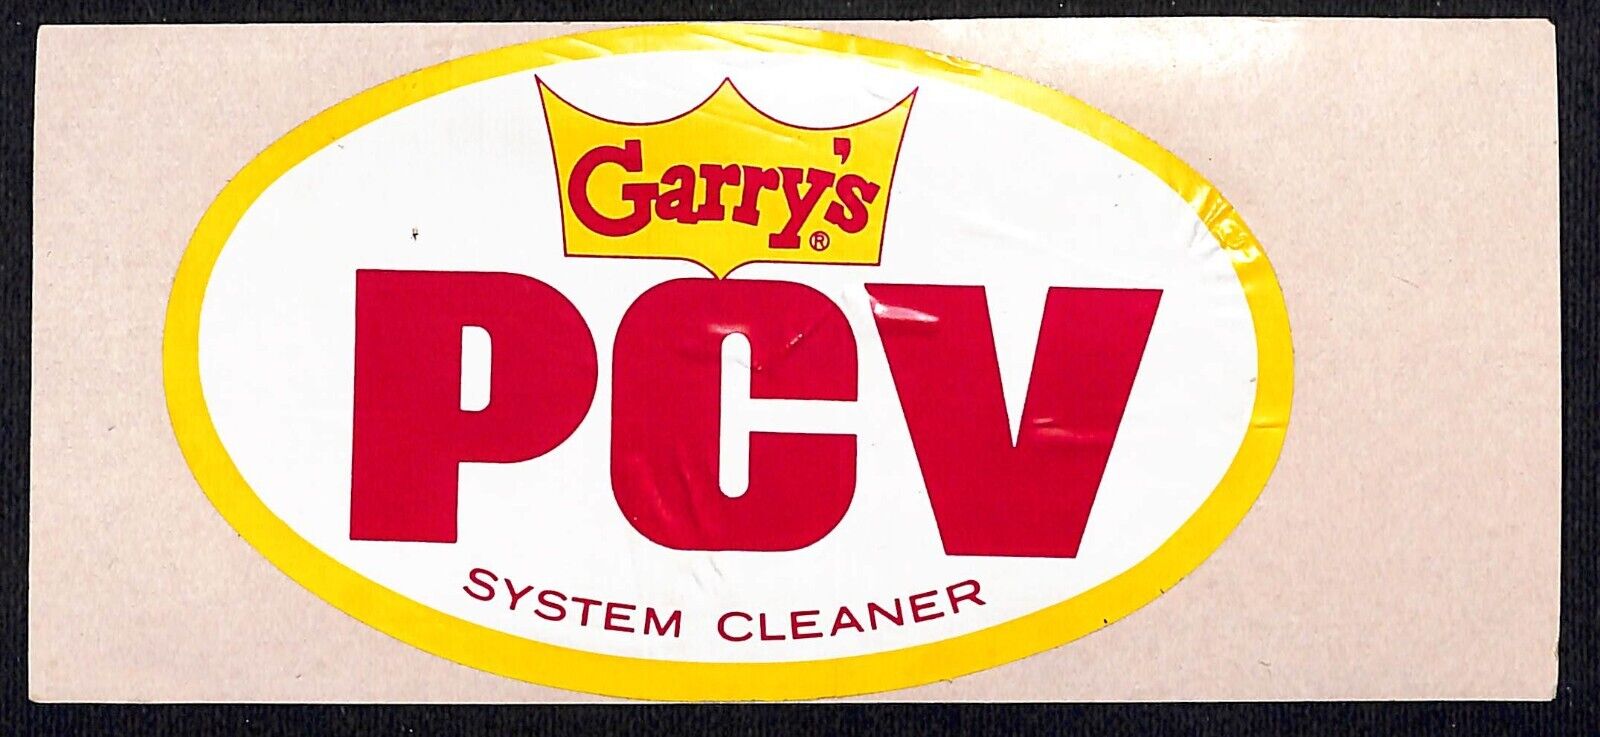 Garry\'s PCV System Cleaner Car Racing / Auto Sticker c1970